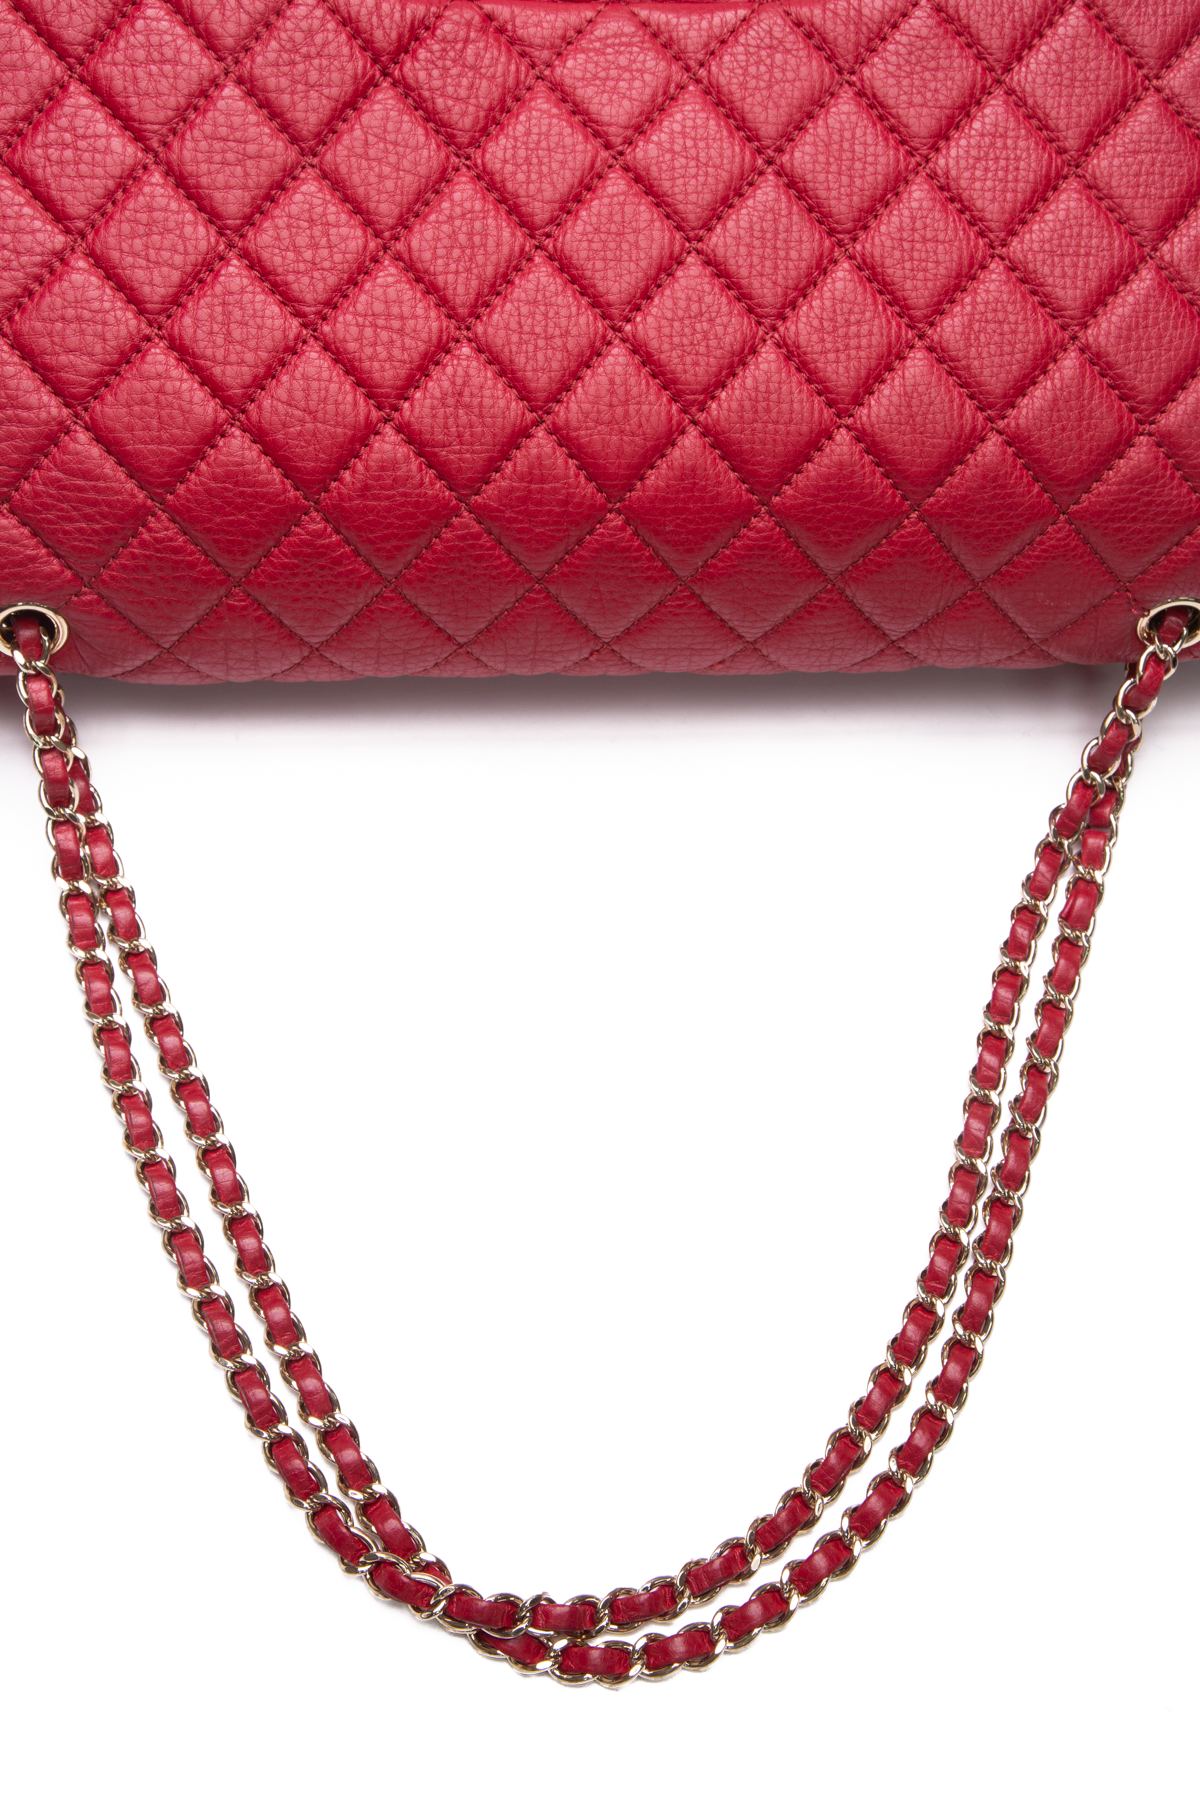 Vintage CHANEL Cherry Red Caviar Leather Quilted Shoulder Bag -  Israel